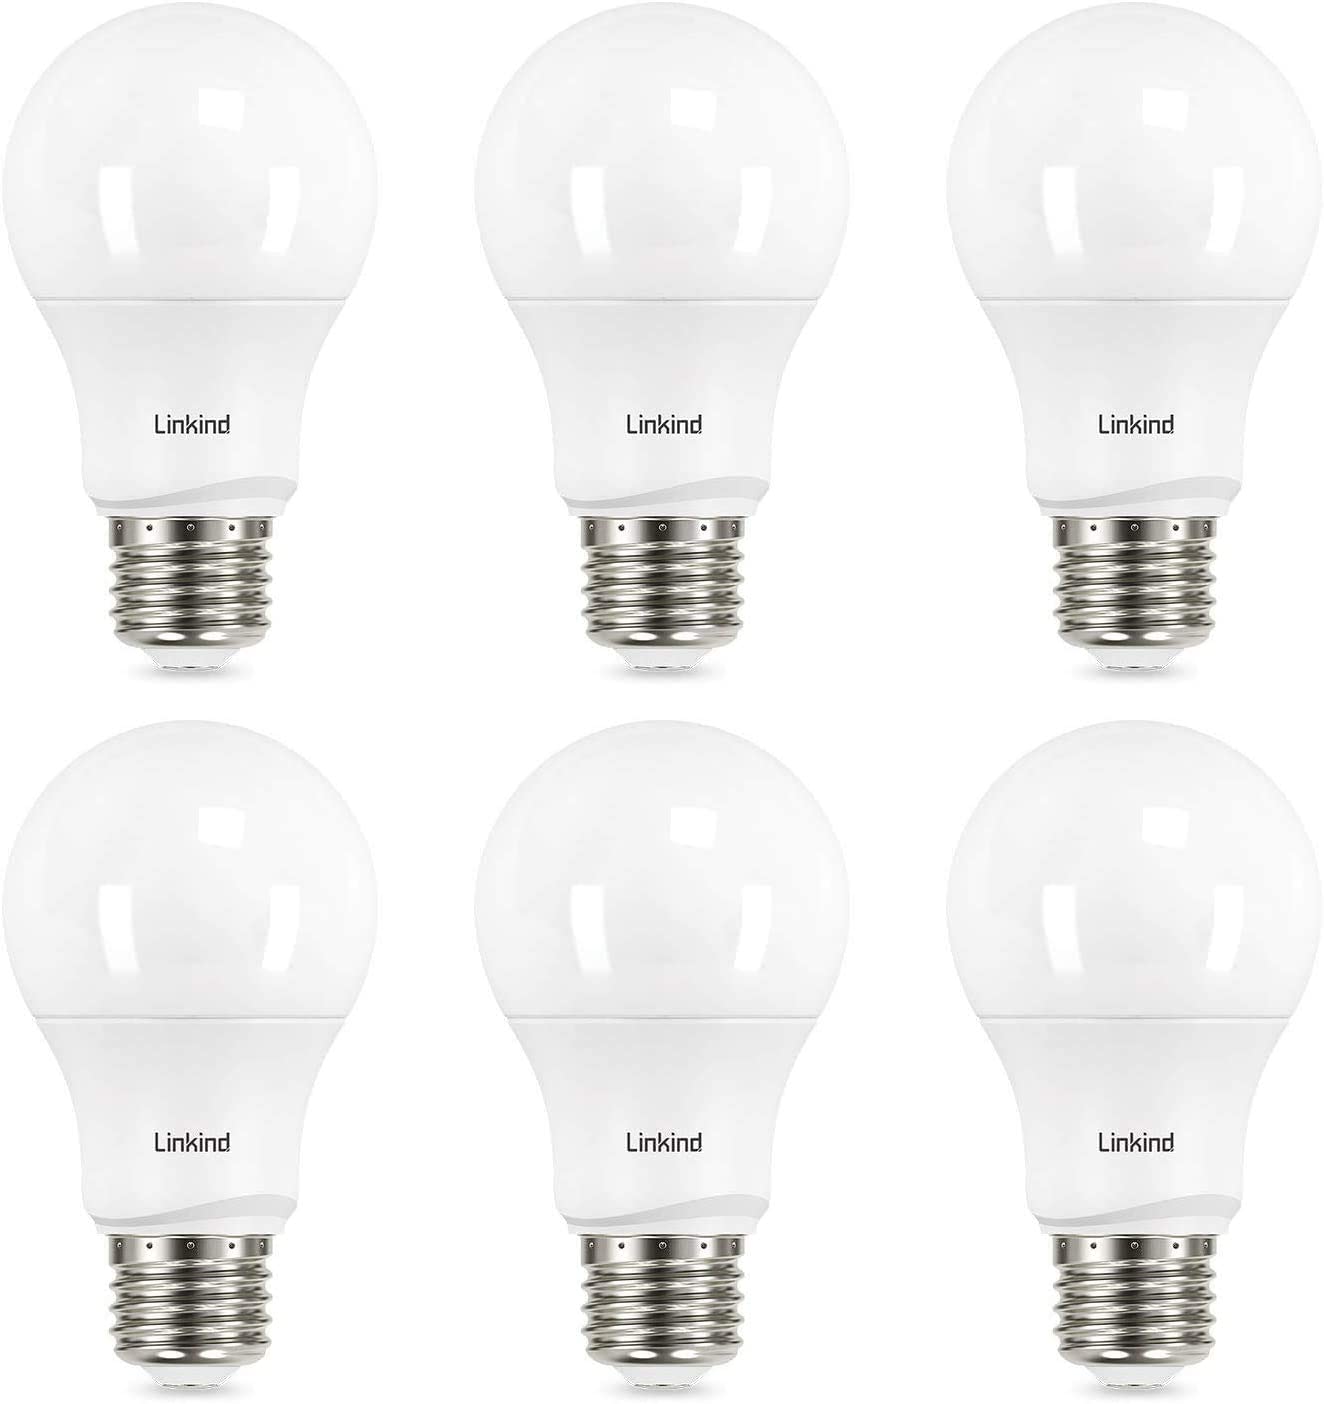 Linkind LED A19 Instant-On Dimmable Lightbulbs, 6-Pack